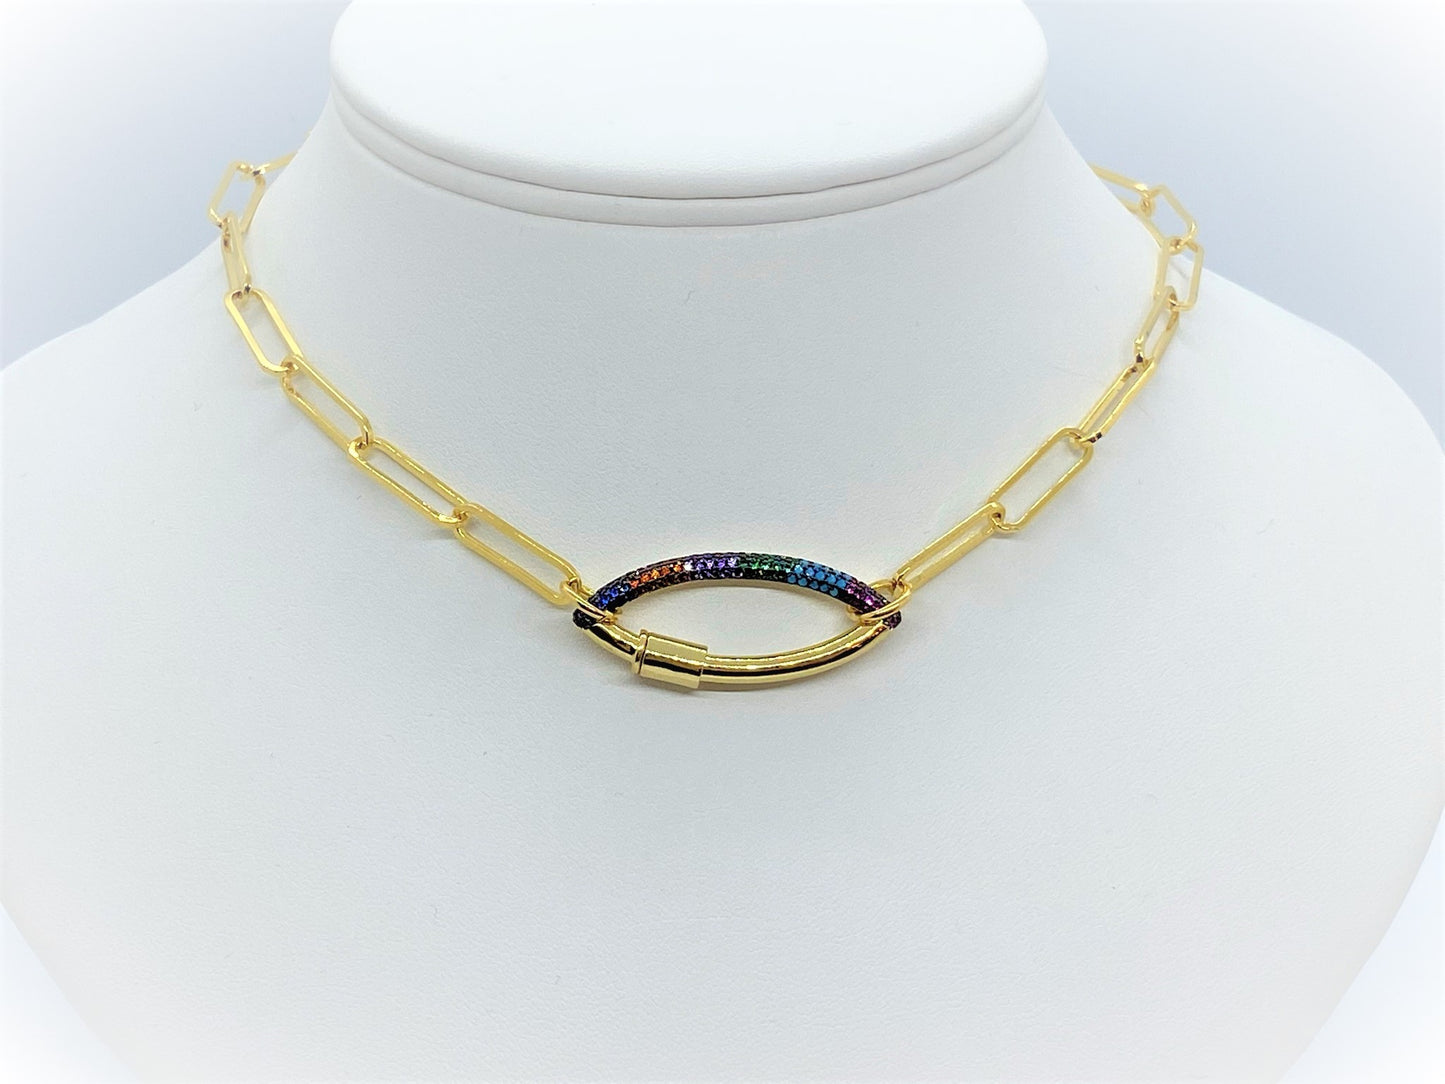 Gold Paperclip necklace with a Multicolor clasp - Emmis Jewelry, Necklace, [product_color]